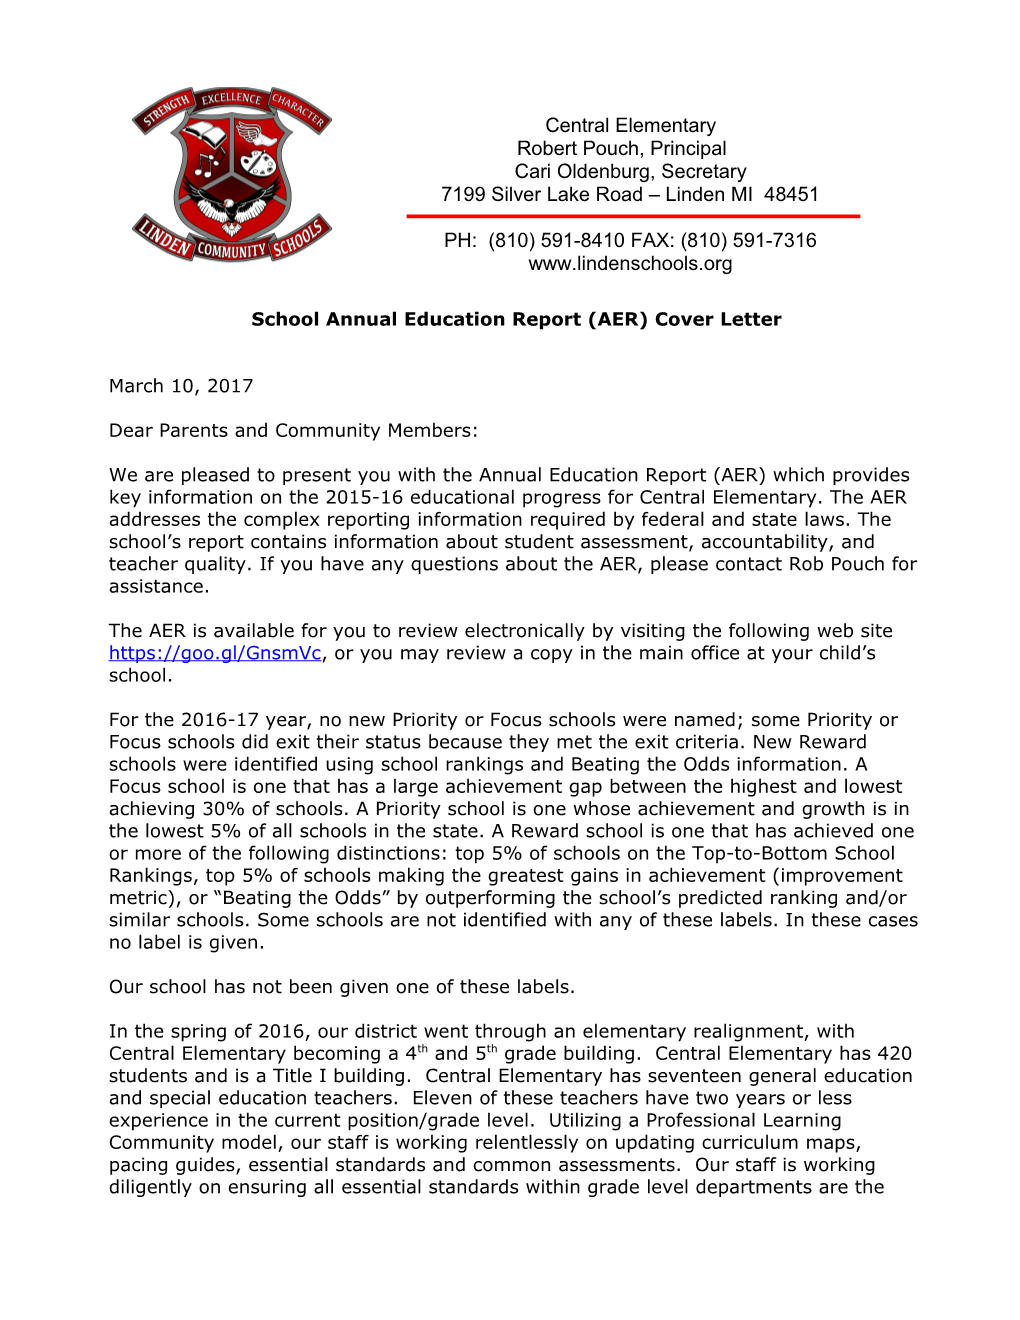 School Annual Education Report (AER) Cover Letter